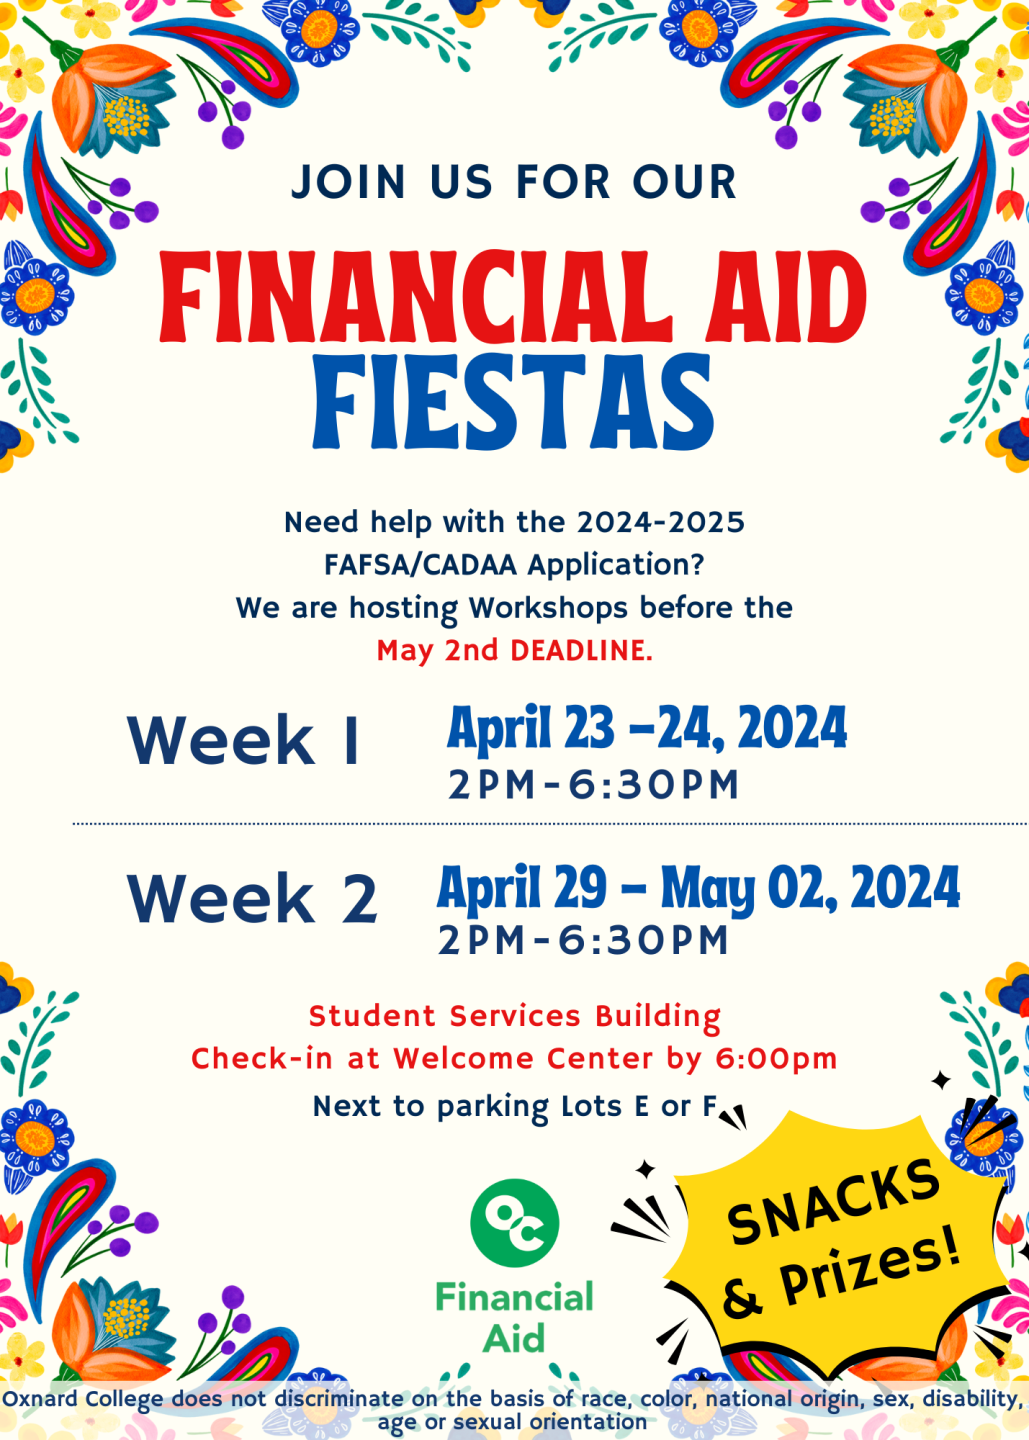 Join us for our Financial Aid Fiestas to help you with your FAFSA/CADAA Application